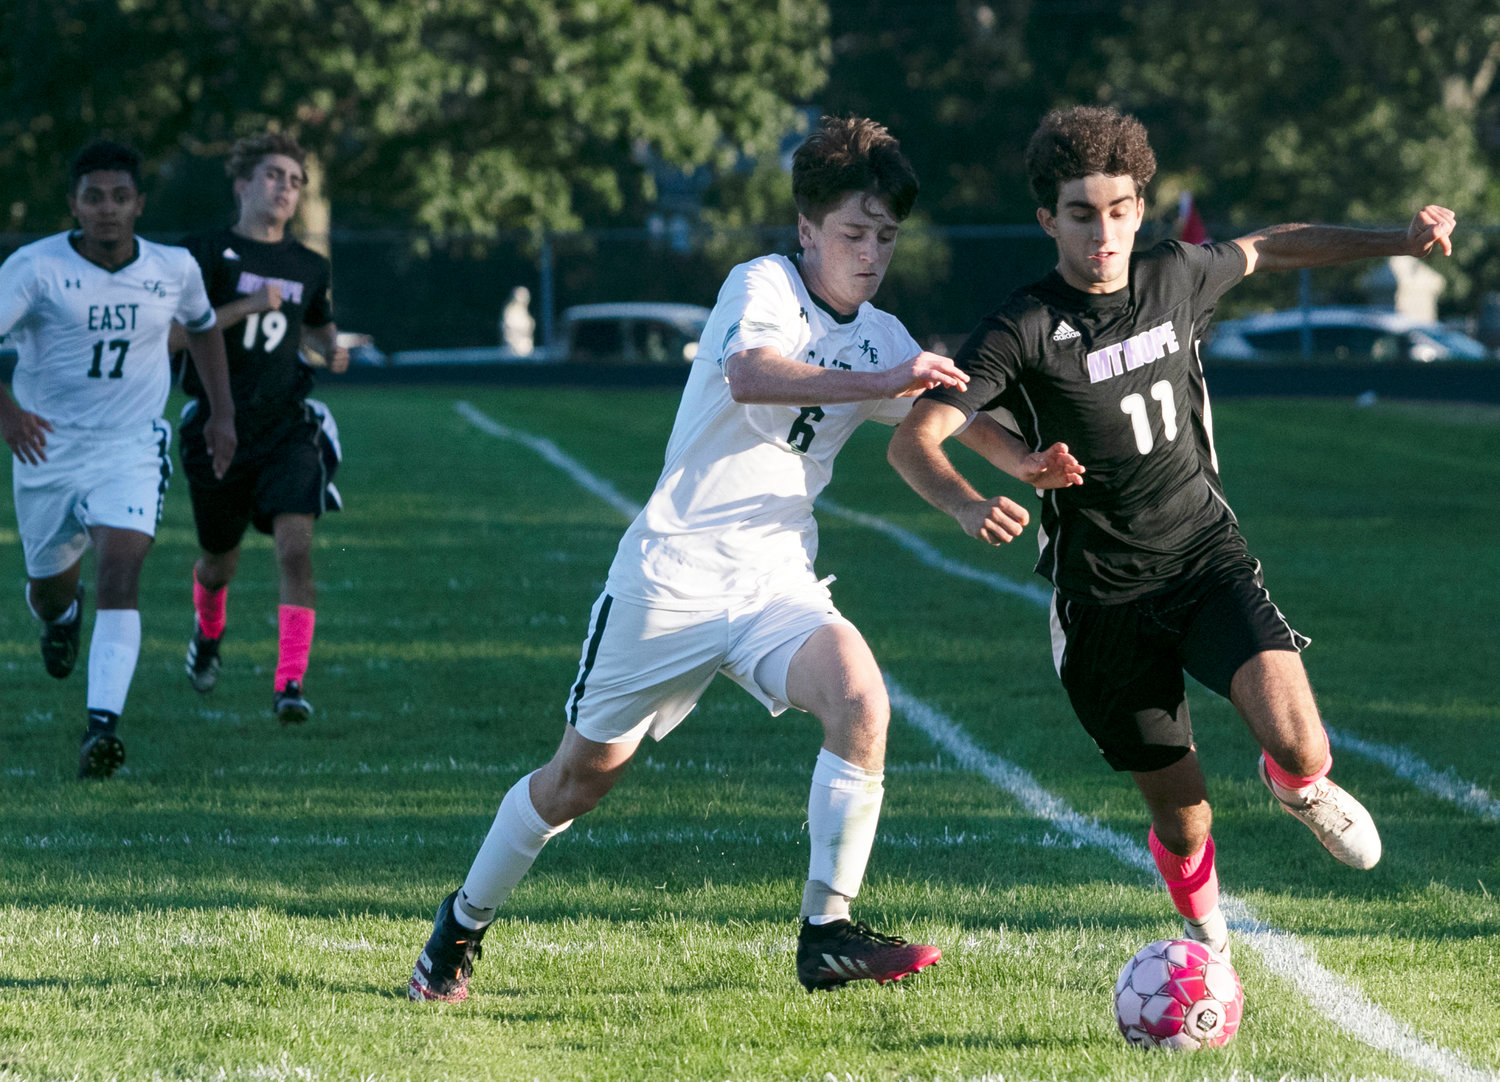 Senior striker Noah Furtado dribbles the ball up the side line during their game against Cranston East at Vendituoli Field on Friday night. Furtado is second in Division II in scoring and the team’s scoring leader with 9 goals, 4 assists for 22 points.